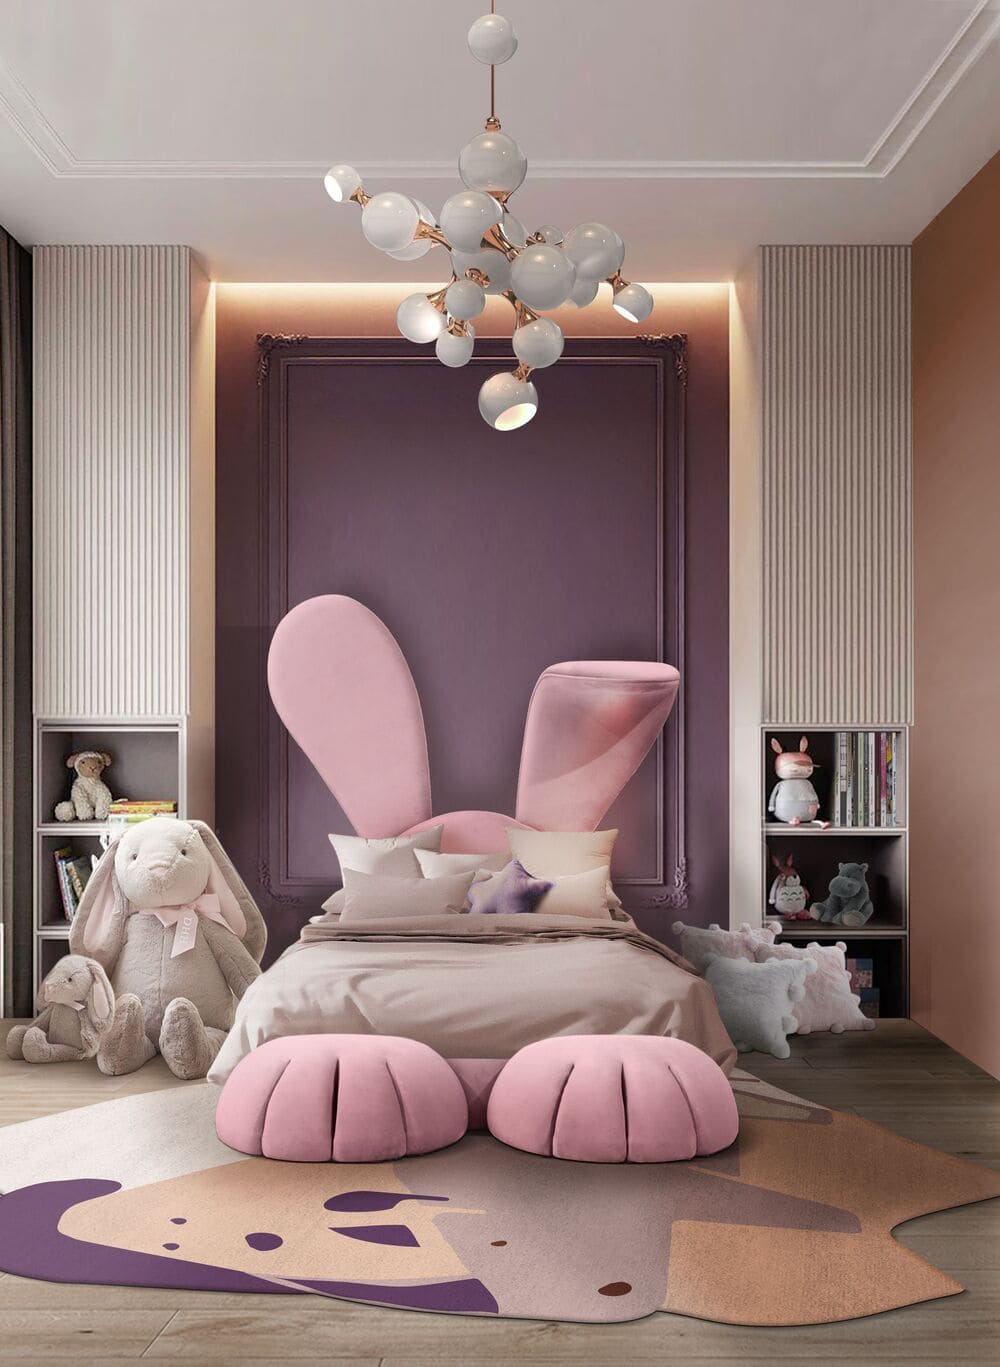 In adorable pink tones and a modern design, this luxury girls' room looks absolutely adorable! The Atomic Suspension Lamp and the Mr. Rhino Rug give a special touch to the space!